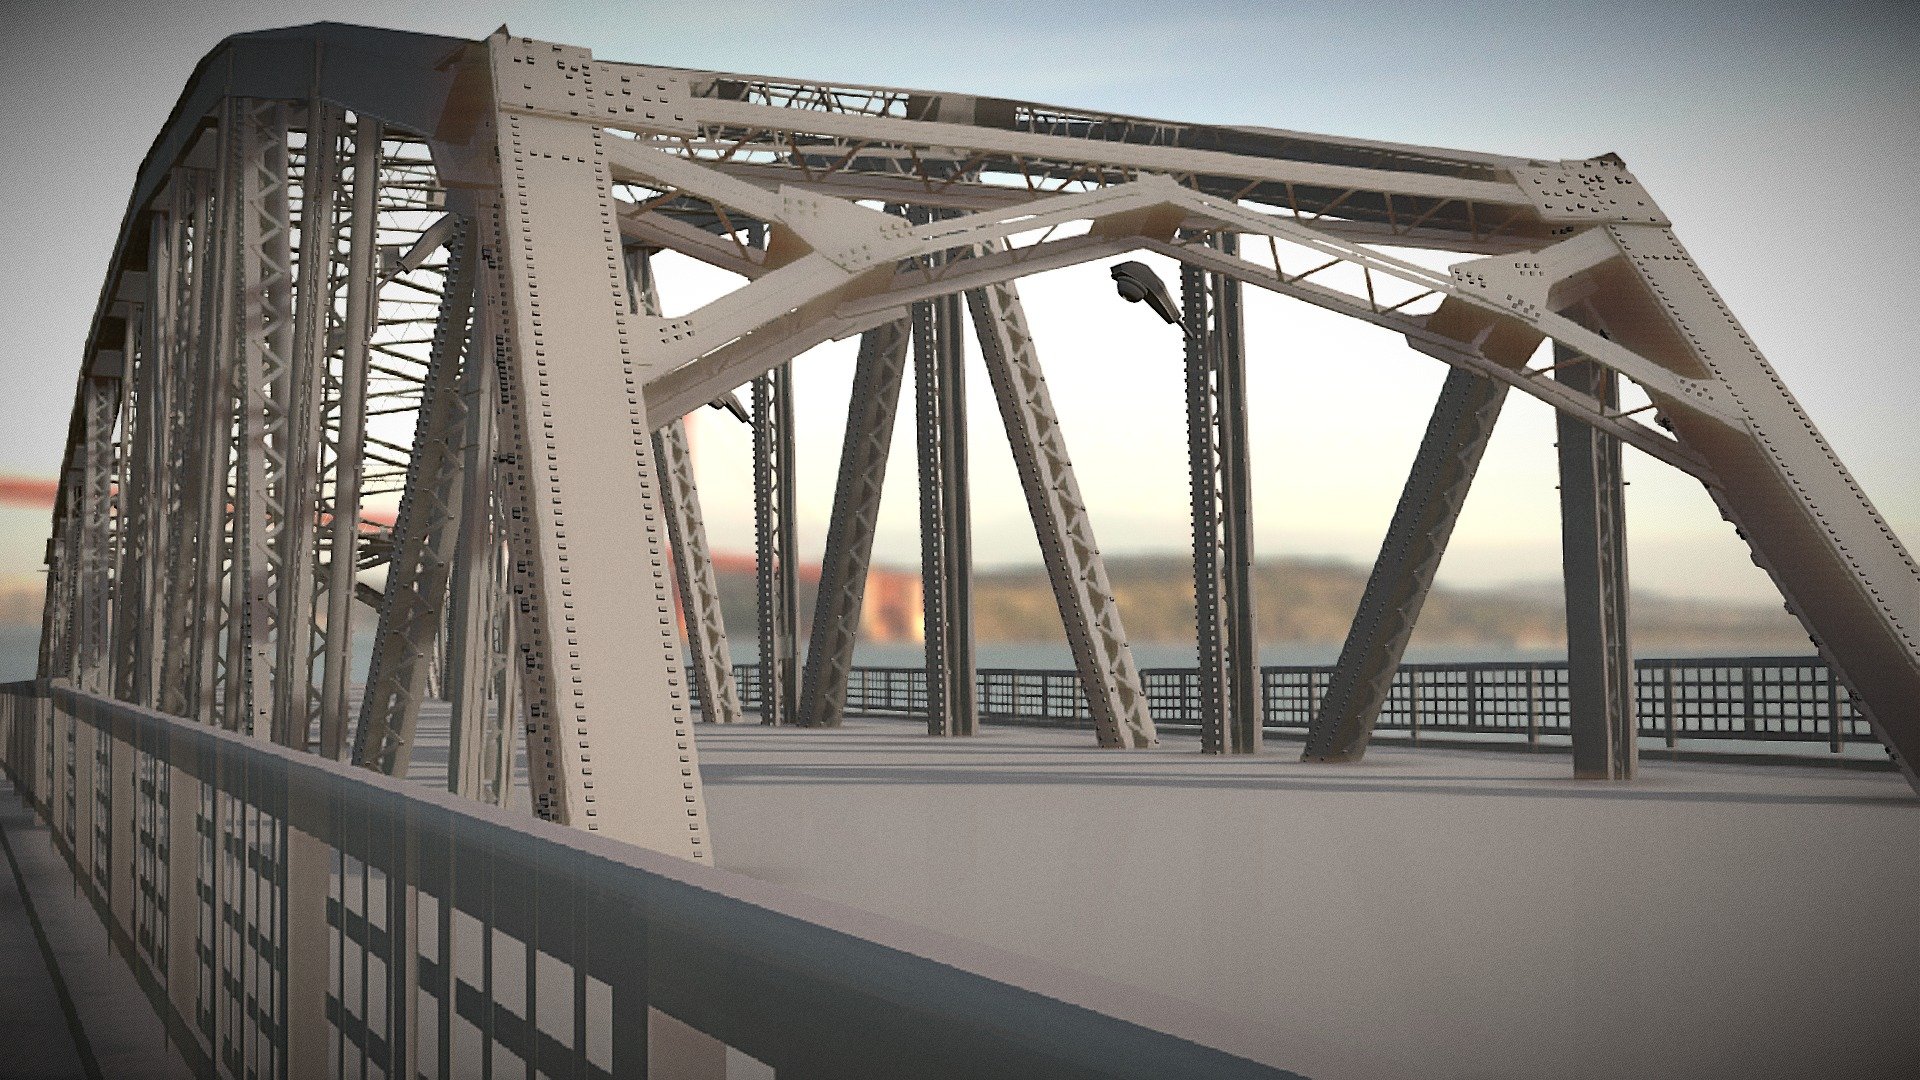 Memorial Bridge is a bascule bridge over the Chao Phraya River in Bangkok, Thailand, connecting the districts of Phra Nakhon and Thonburi 3d model